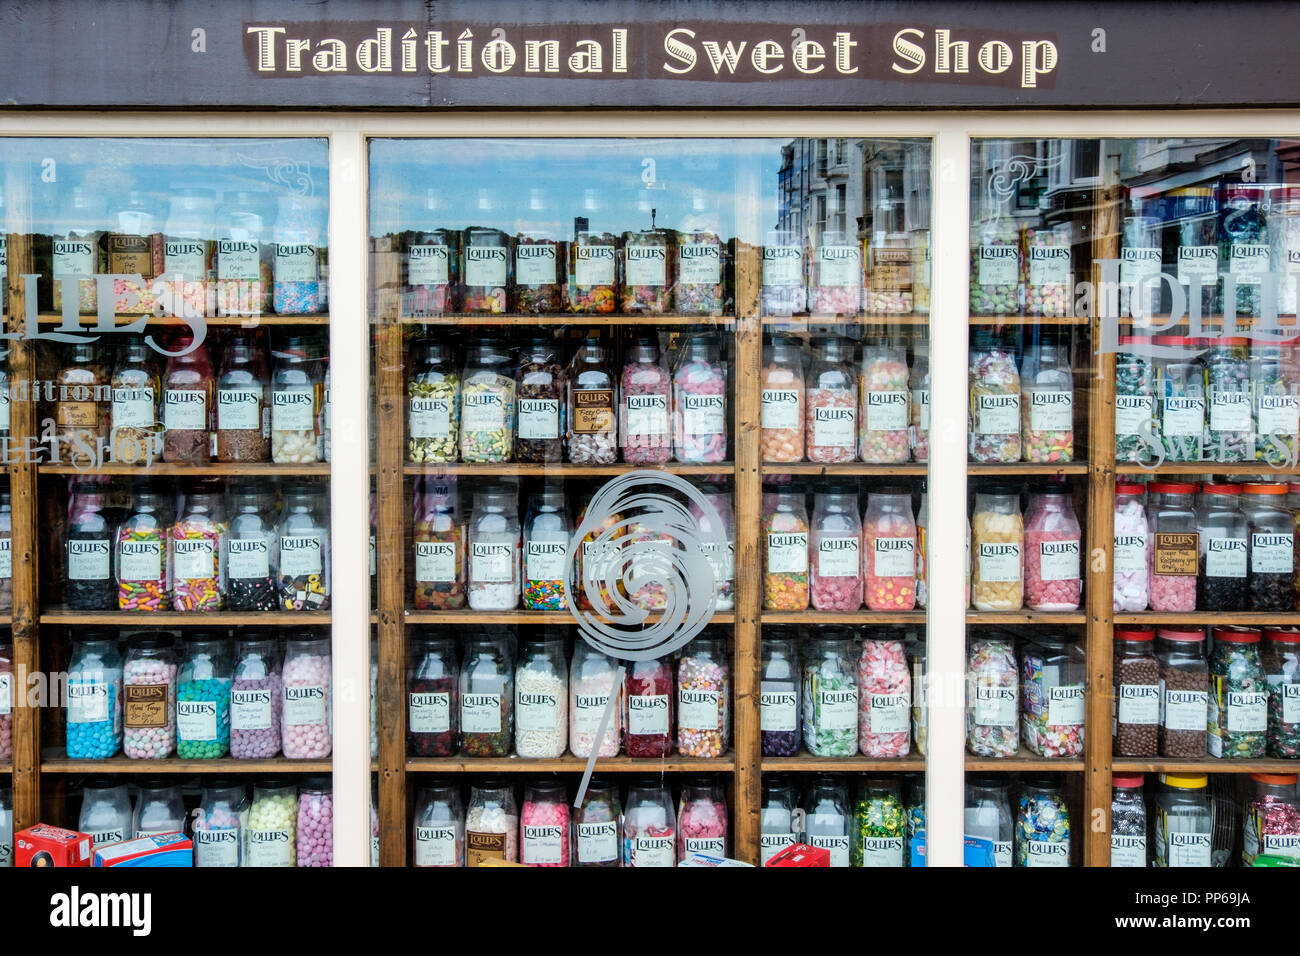 Lollies Traditional Sweet Shop, Tenby, Pembrokeshire, Wales Stock Photo